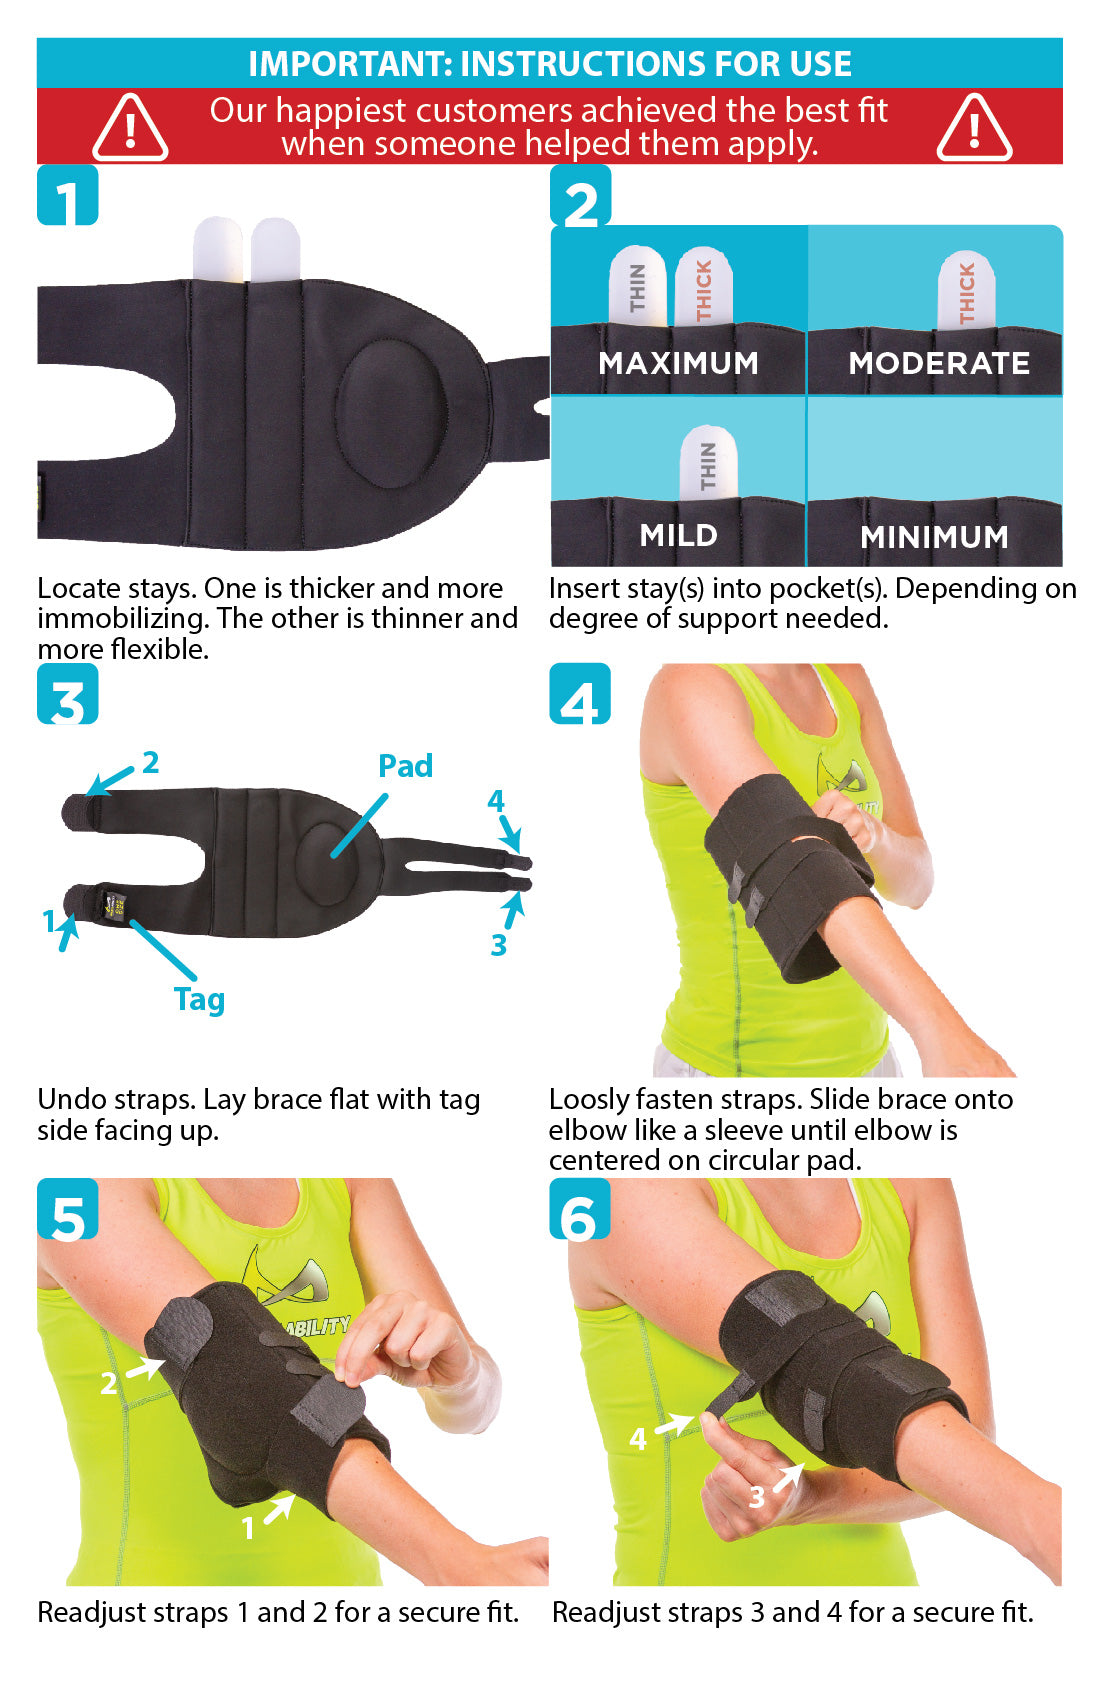 the instruction sheet for the cubital tunnel brace shows wrapping the wide straps around your arm